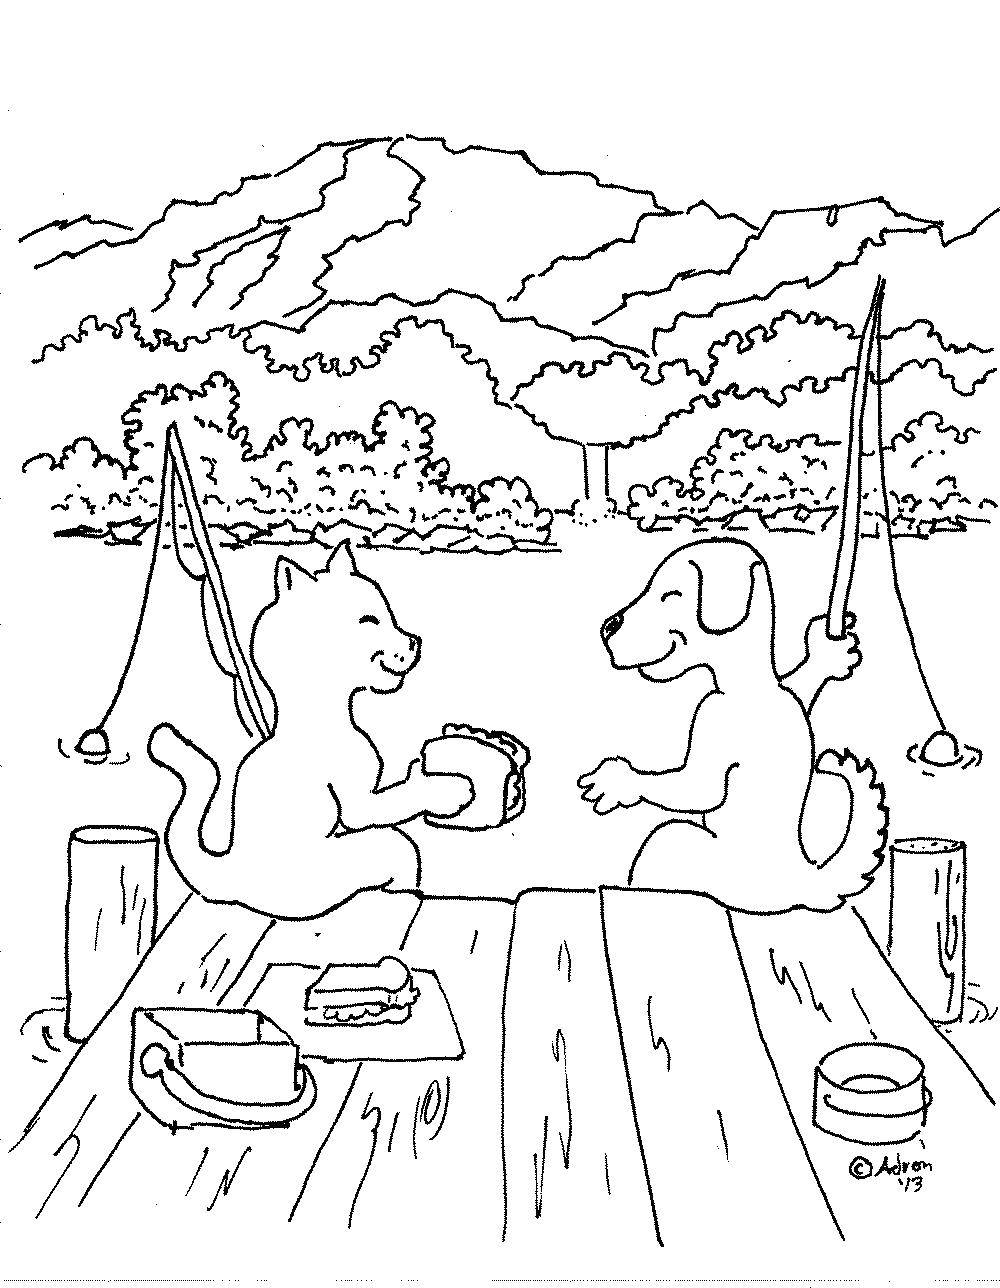 Coloring The cat and the dog at the picnic. Category Pets allowed. Tags:  animals, cat, dog, picnic.